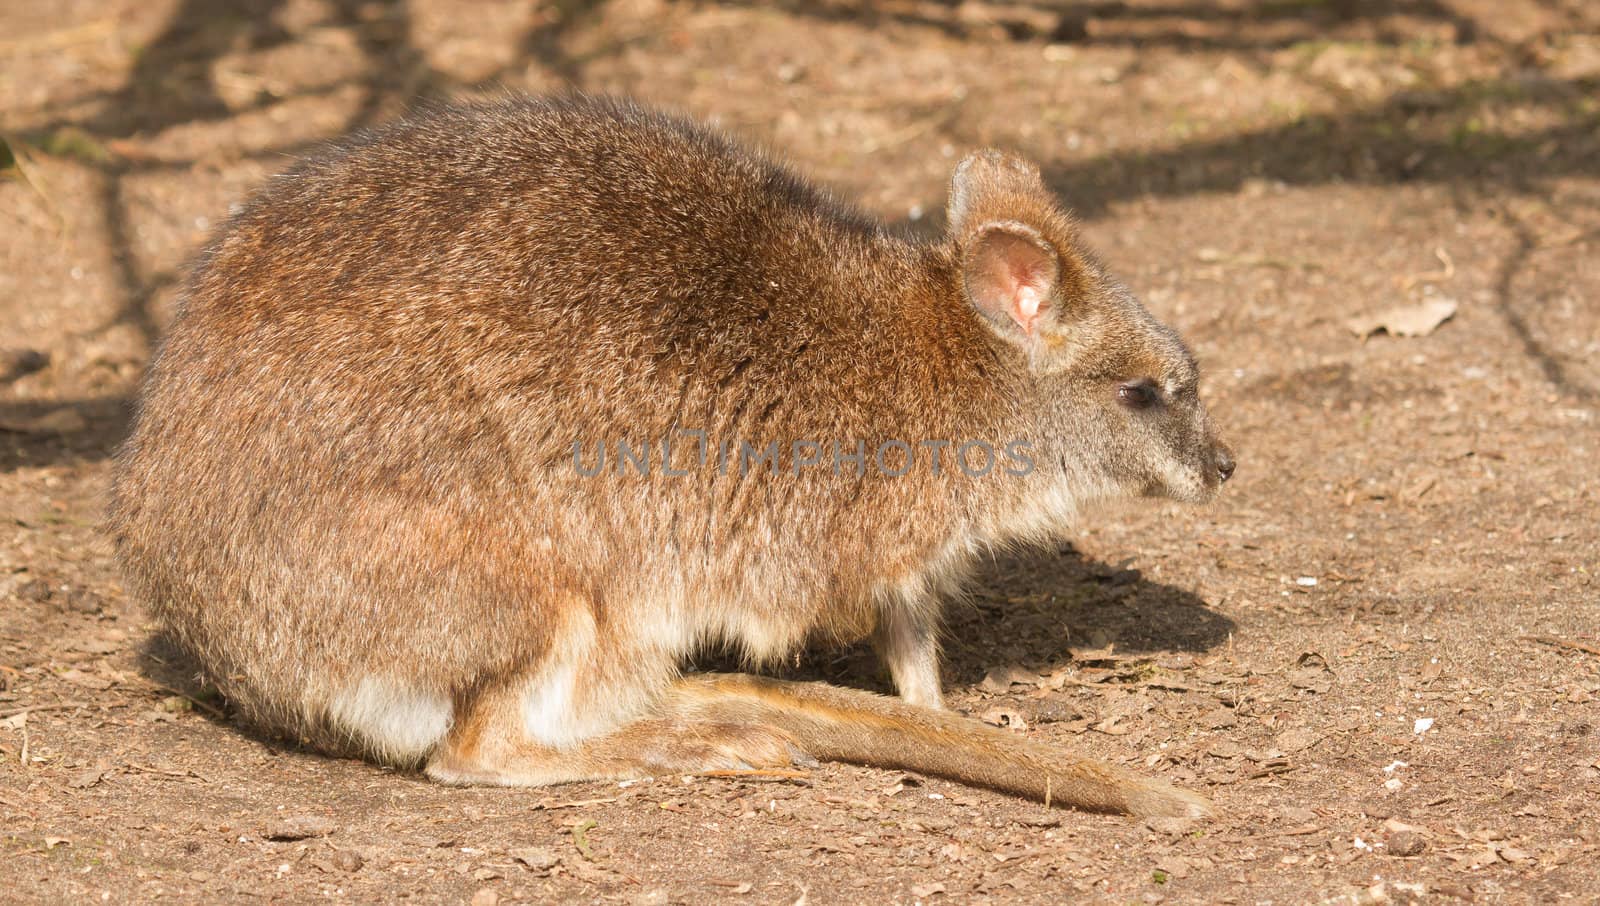 A parma wallaby by michaklootwijk